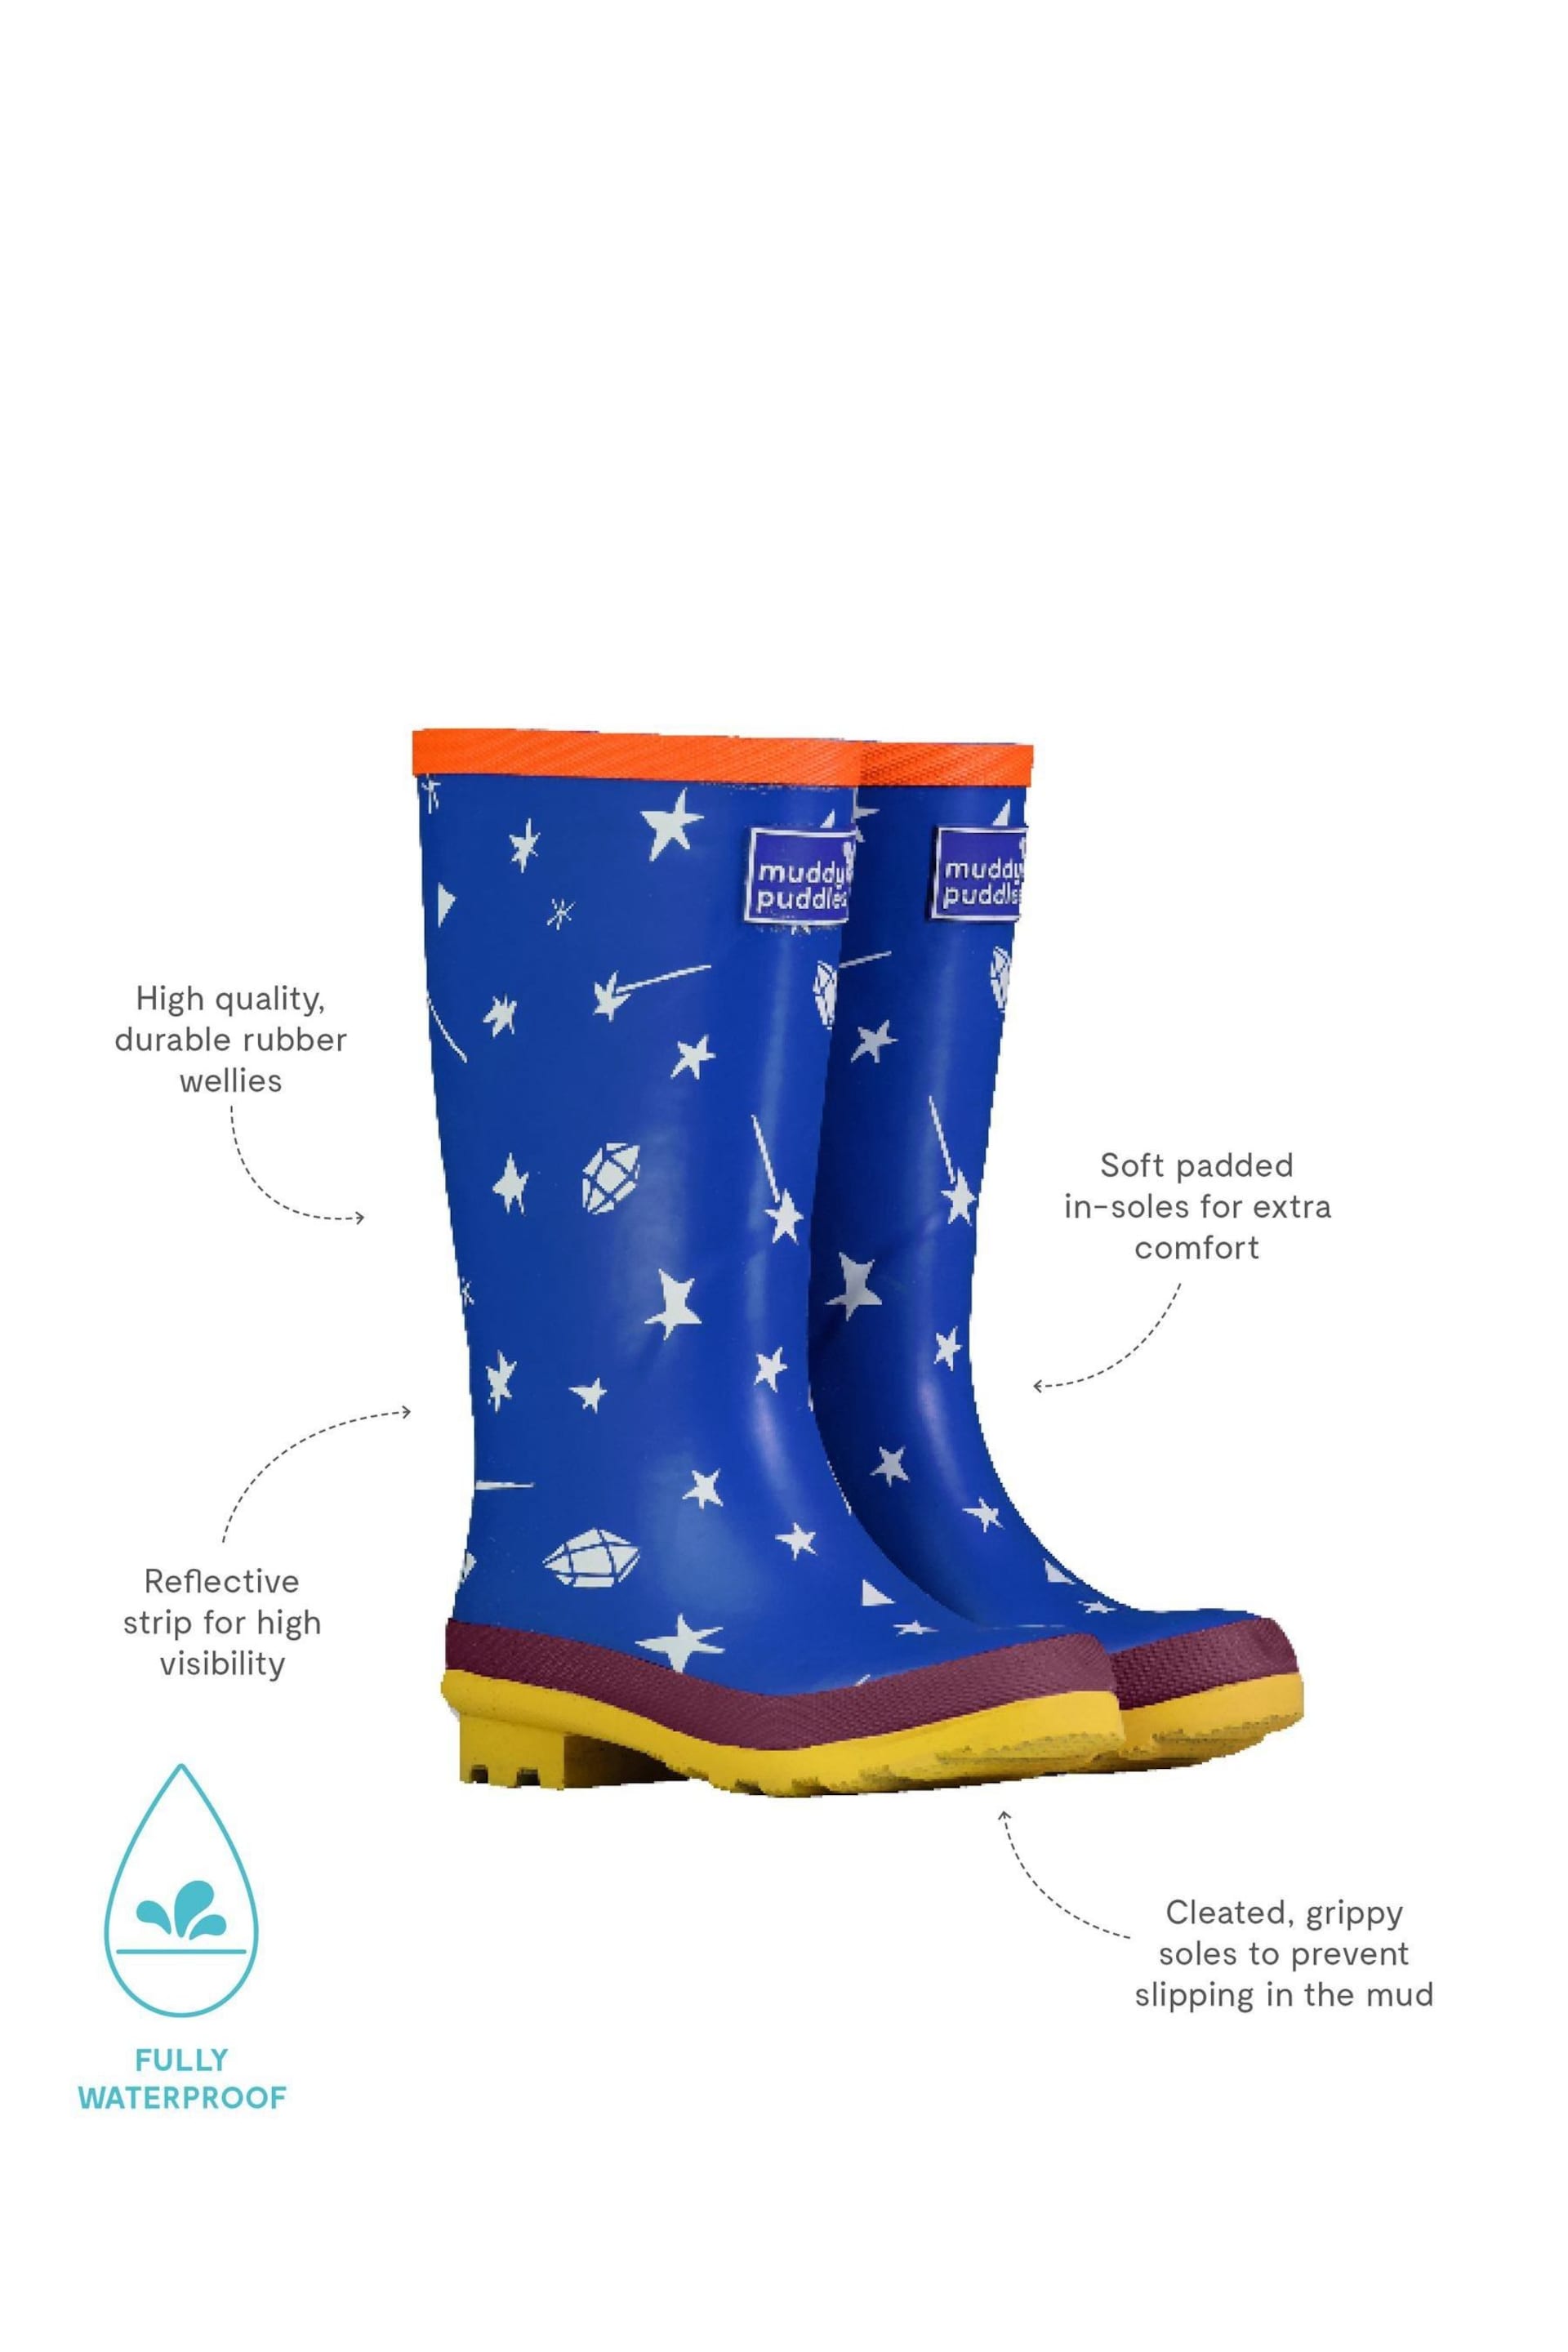 Muddy Puddles Puddlestomper Wellies - Image 3 of 3